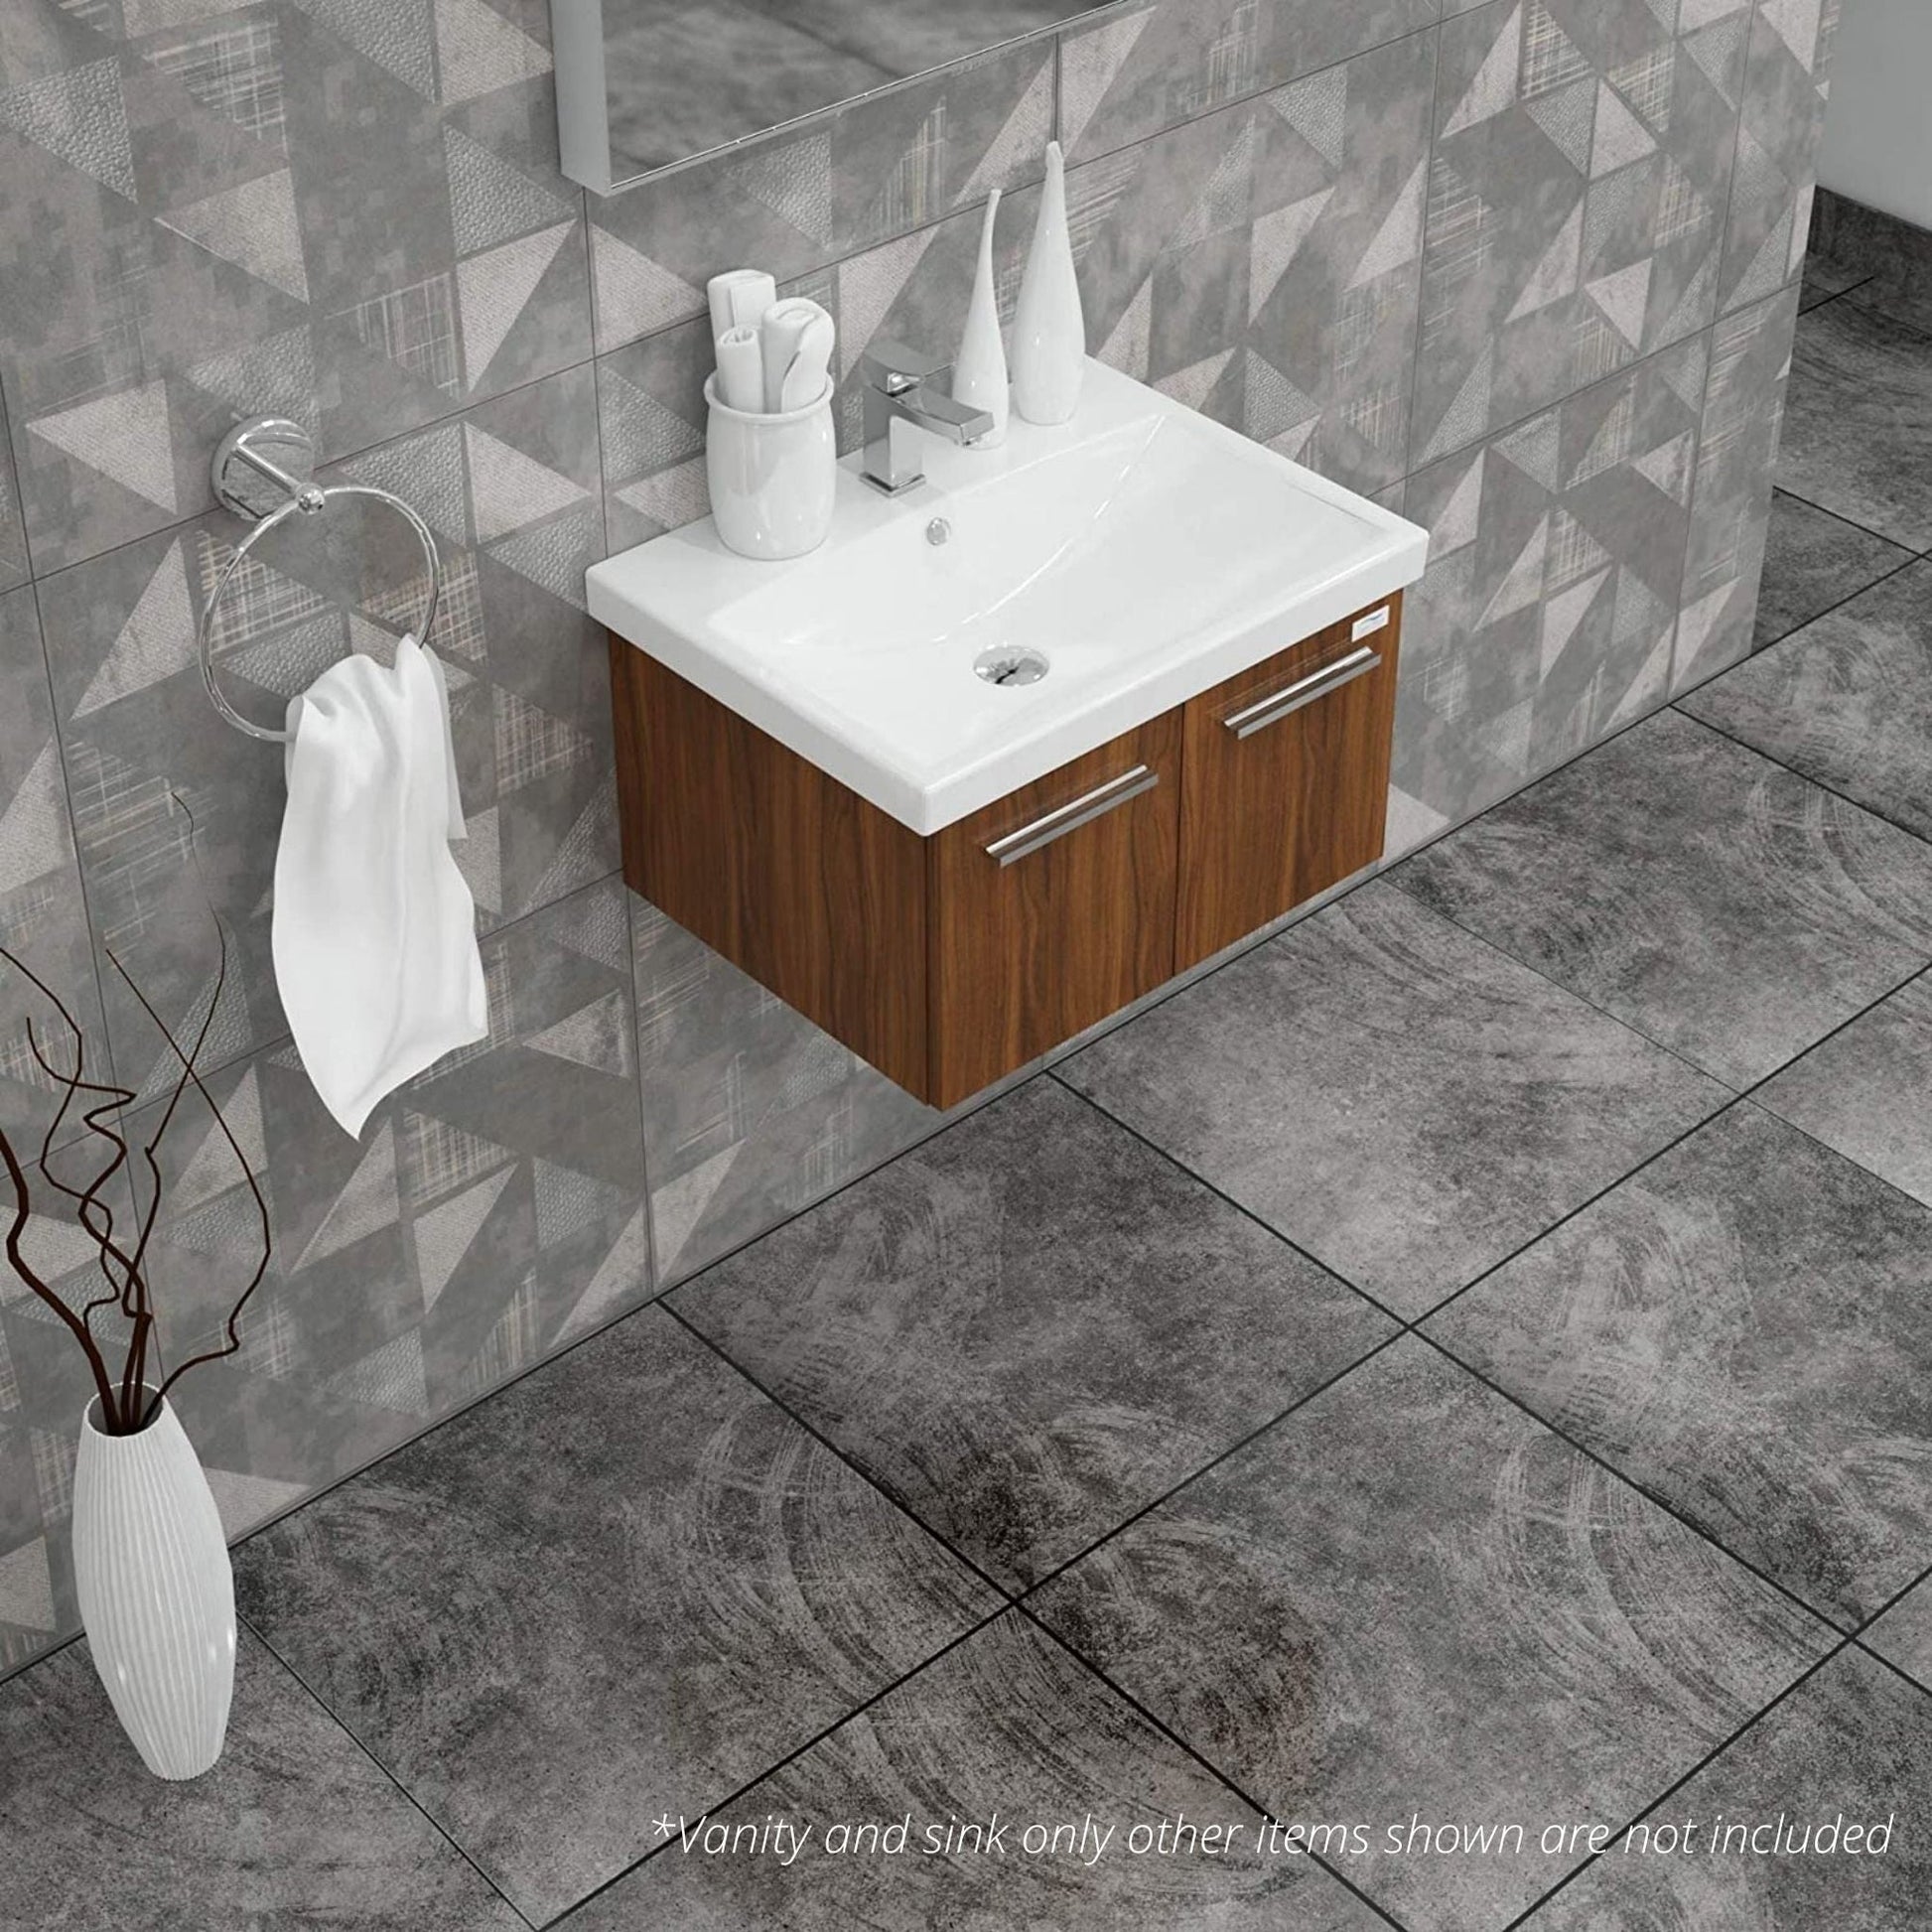 Casa Mare Aspe 24" Matte Walnut Wall-Mounted Bathroom Vanity and Ceramic Sink Combo With LED Mirror